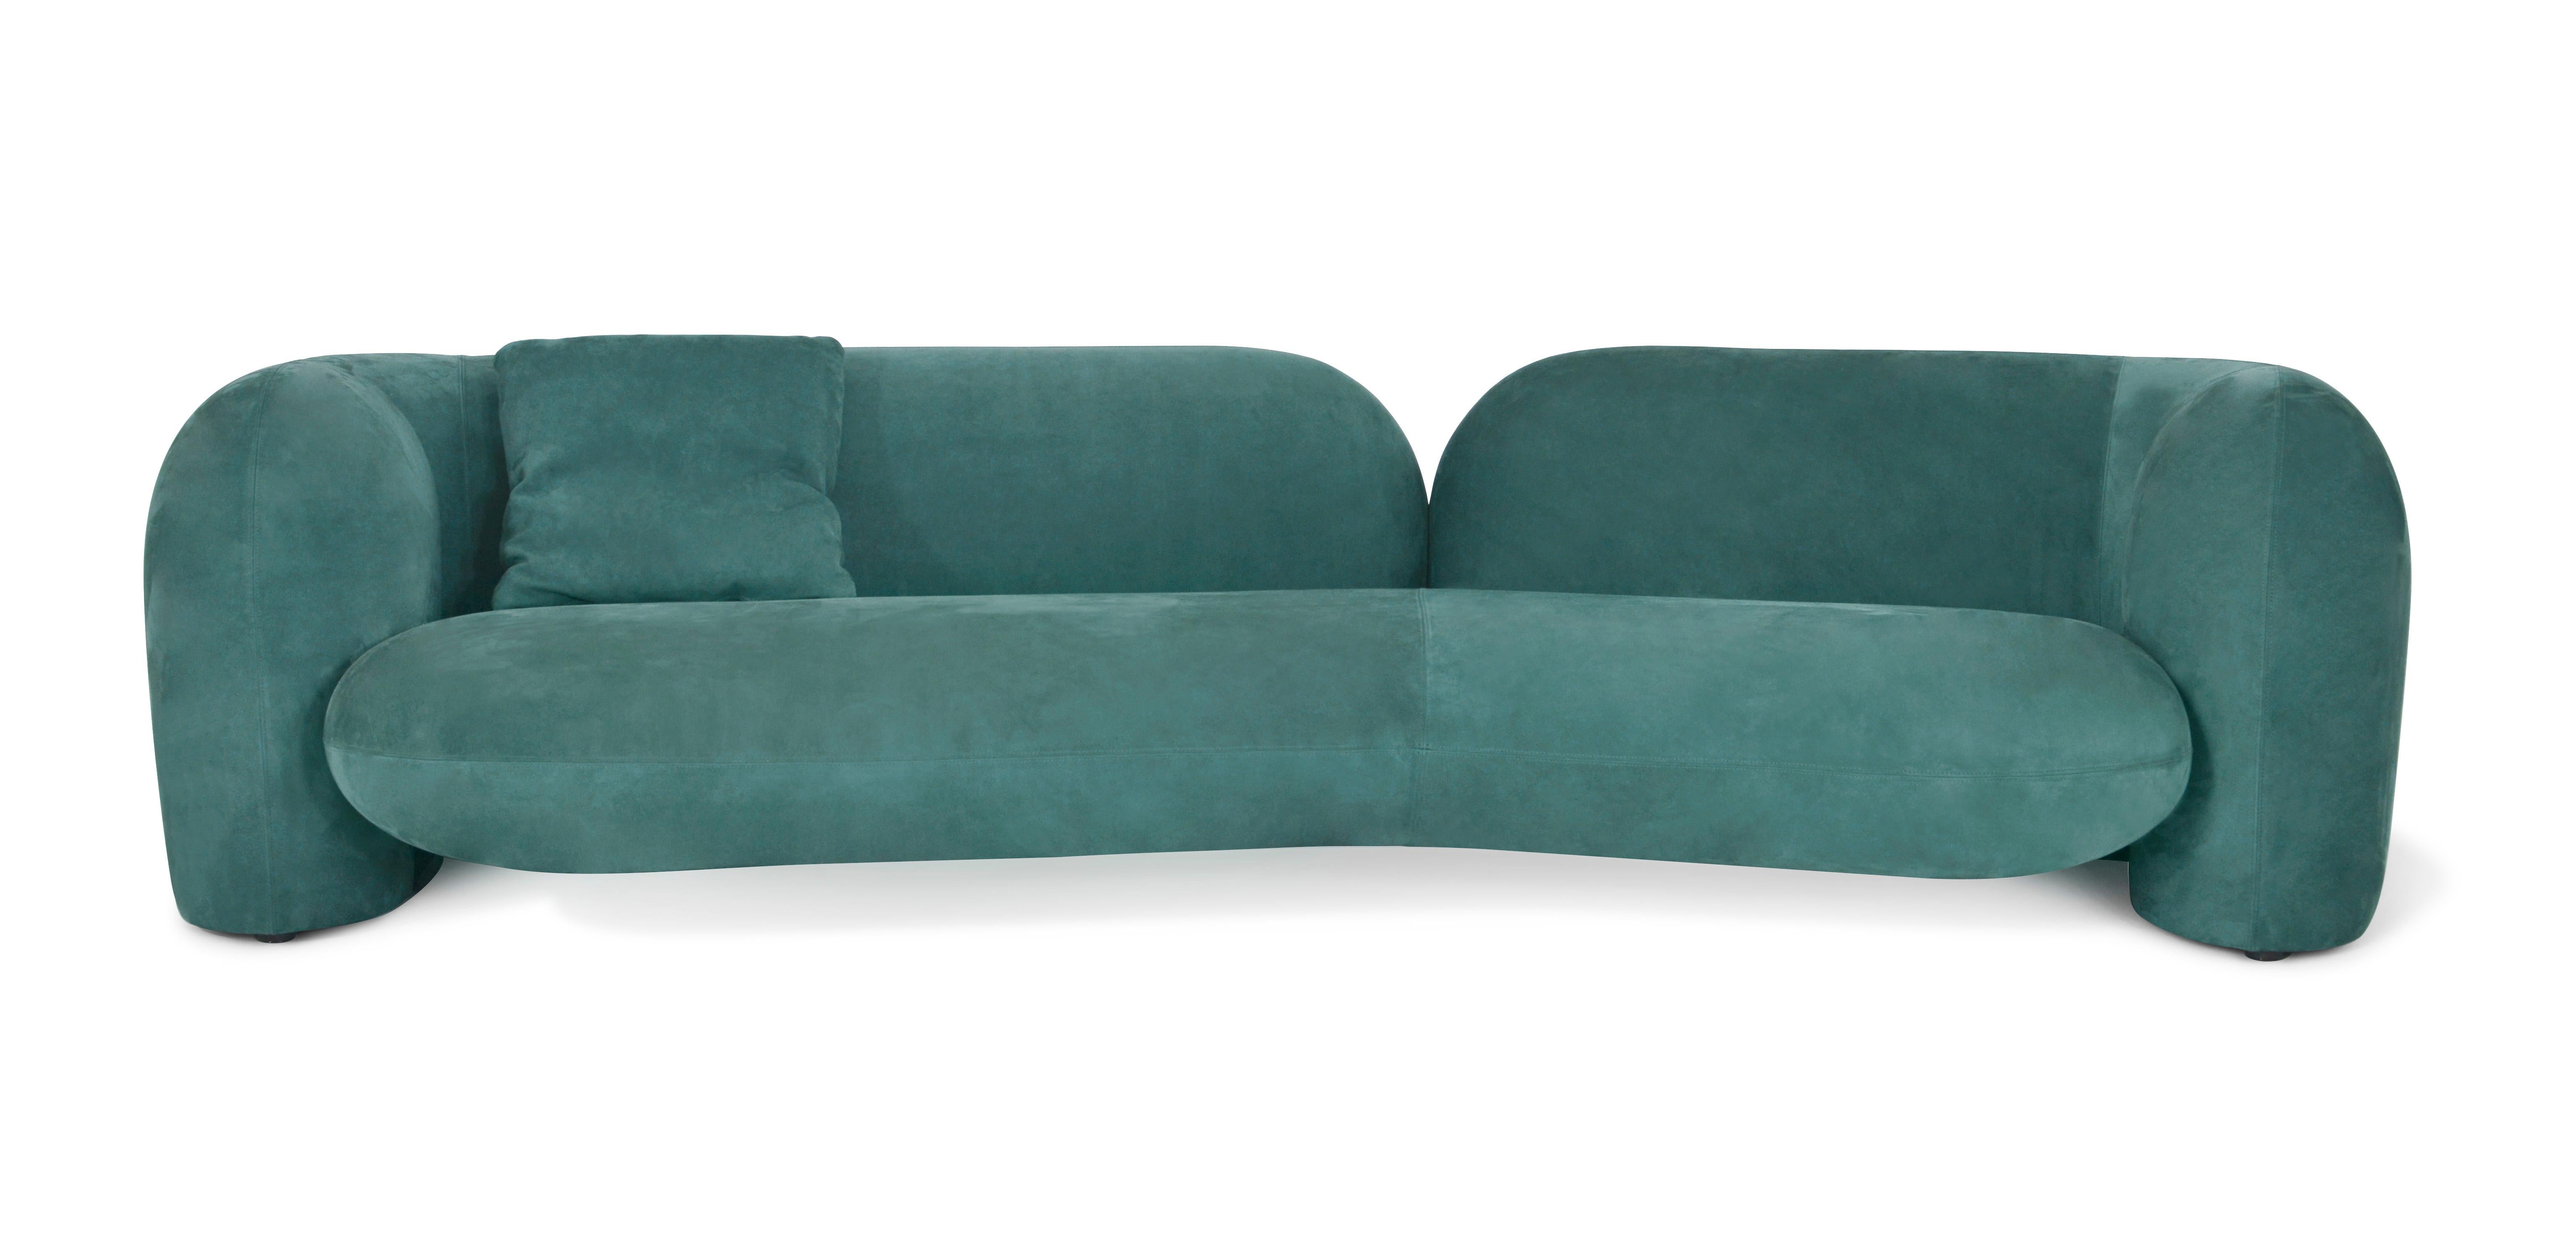 Gio sofa is the result of a long design process and a synergistic collaboration between the architect Luca Erba and company Cornelio Cappellini. This sofa amazes for its soft and defined volumes, but especially for the comfort given by the freshness